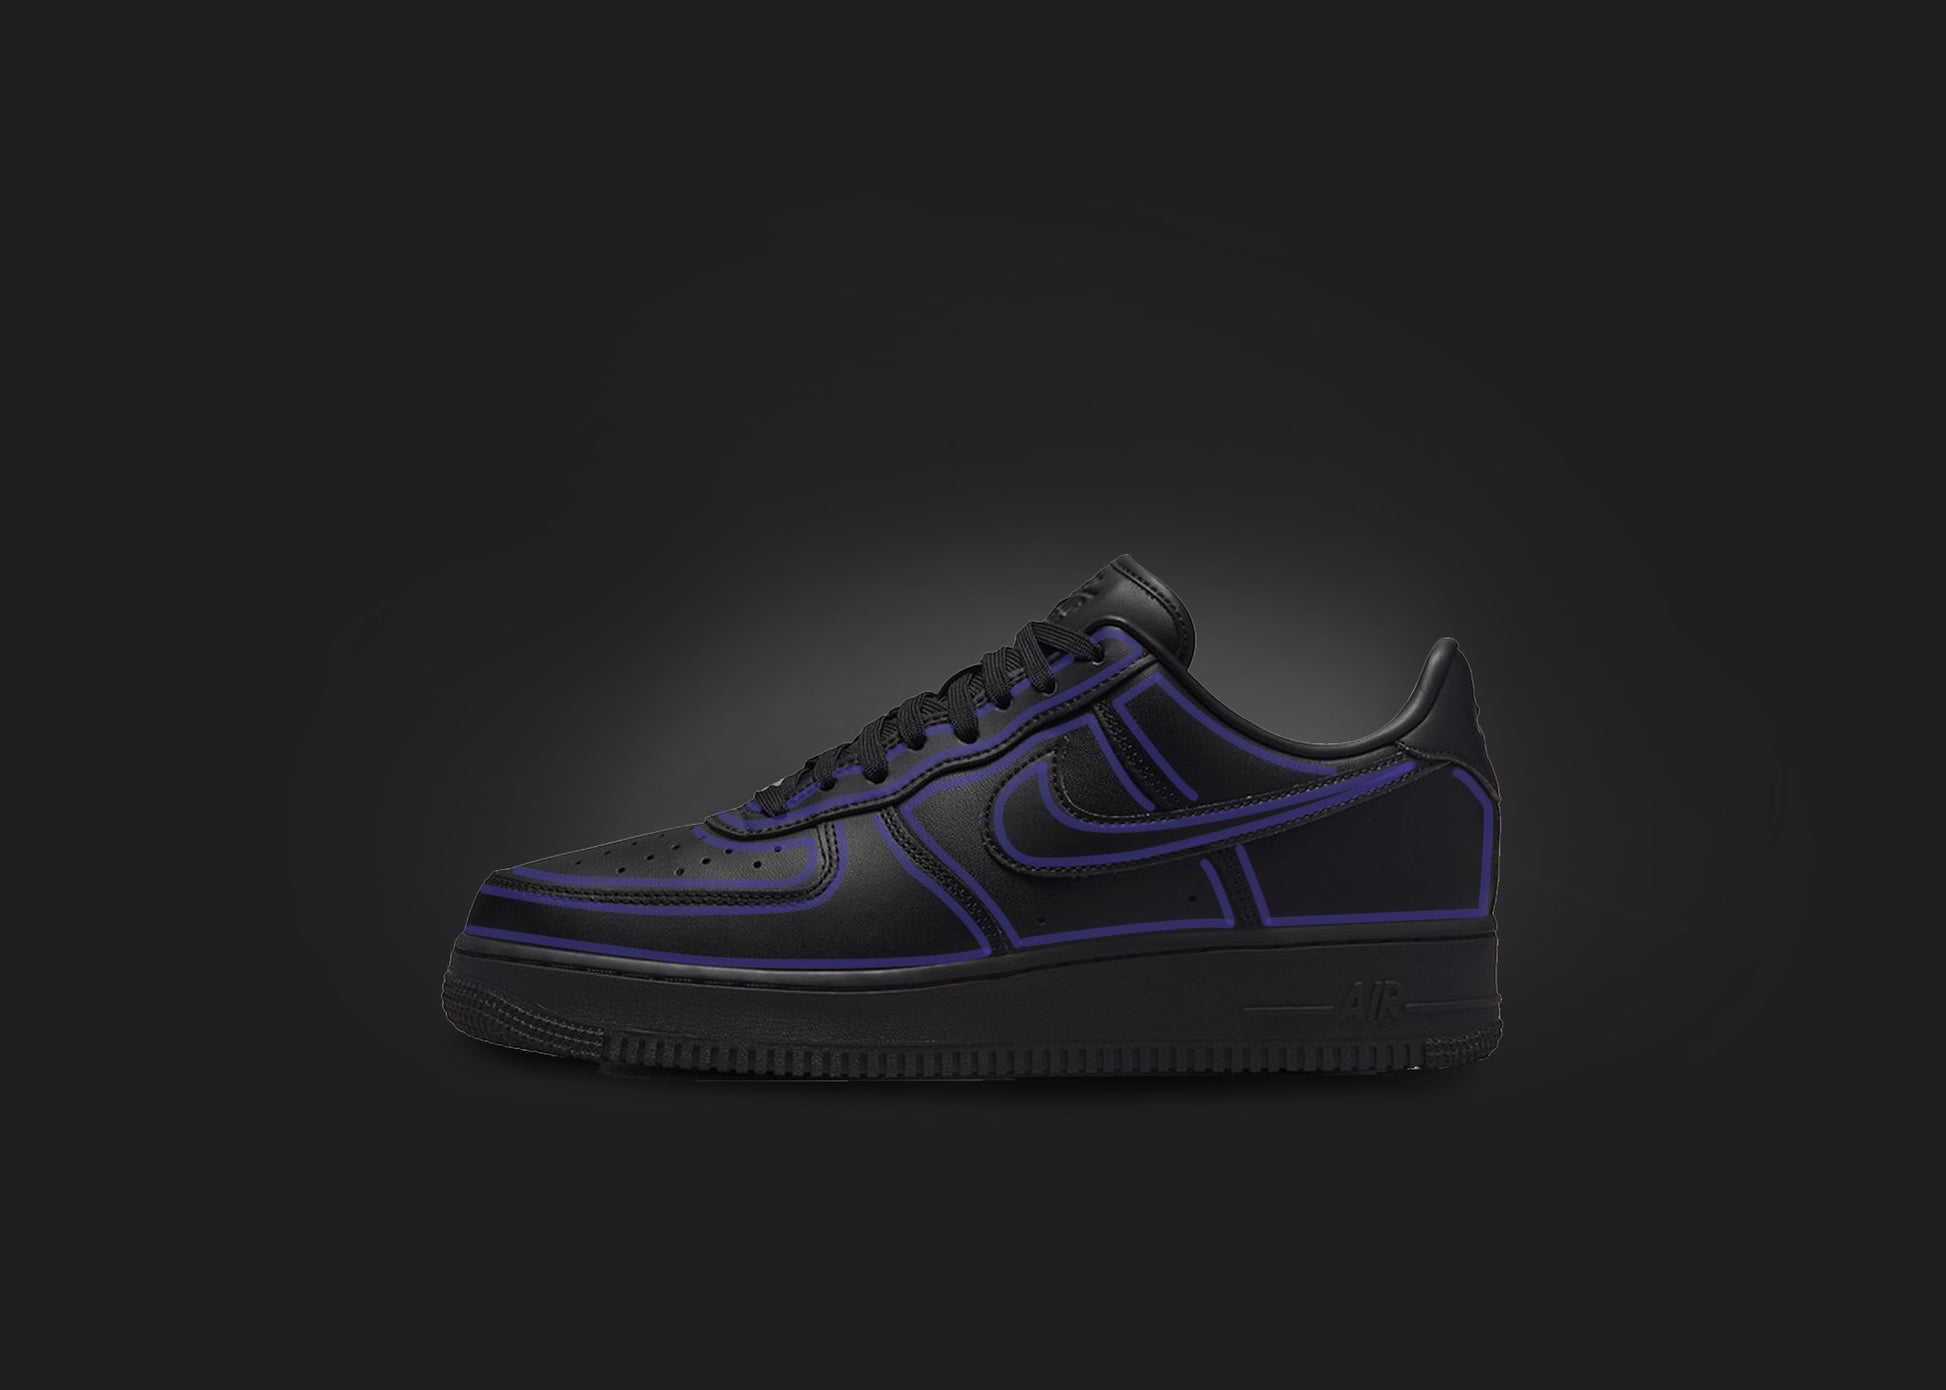 The image is featuring a custom black Air force 1 sneaker on a blank black background. The black nike sneaker has a purple cartoon outline design all over the sneaker. 